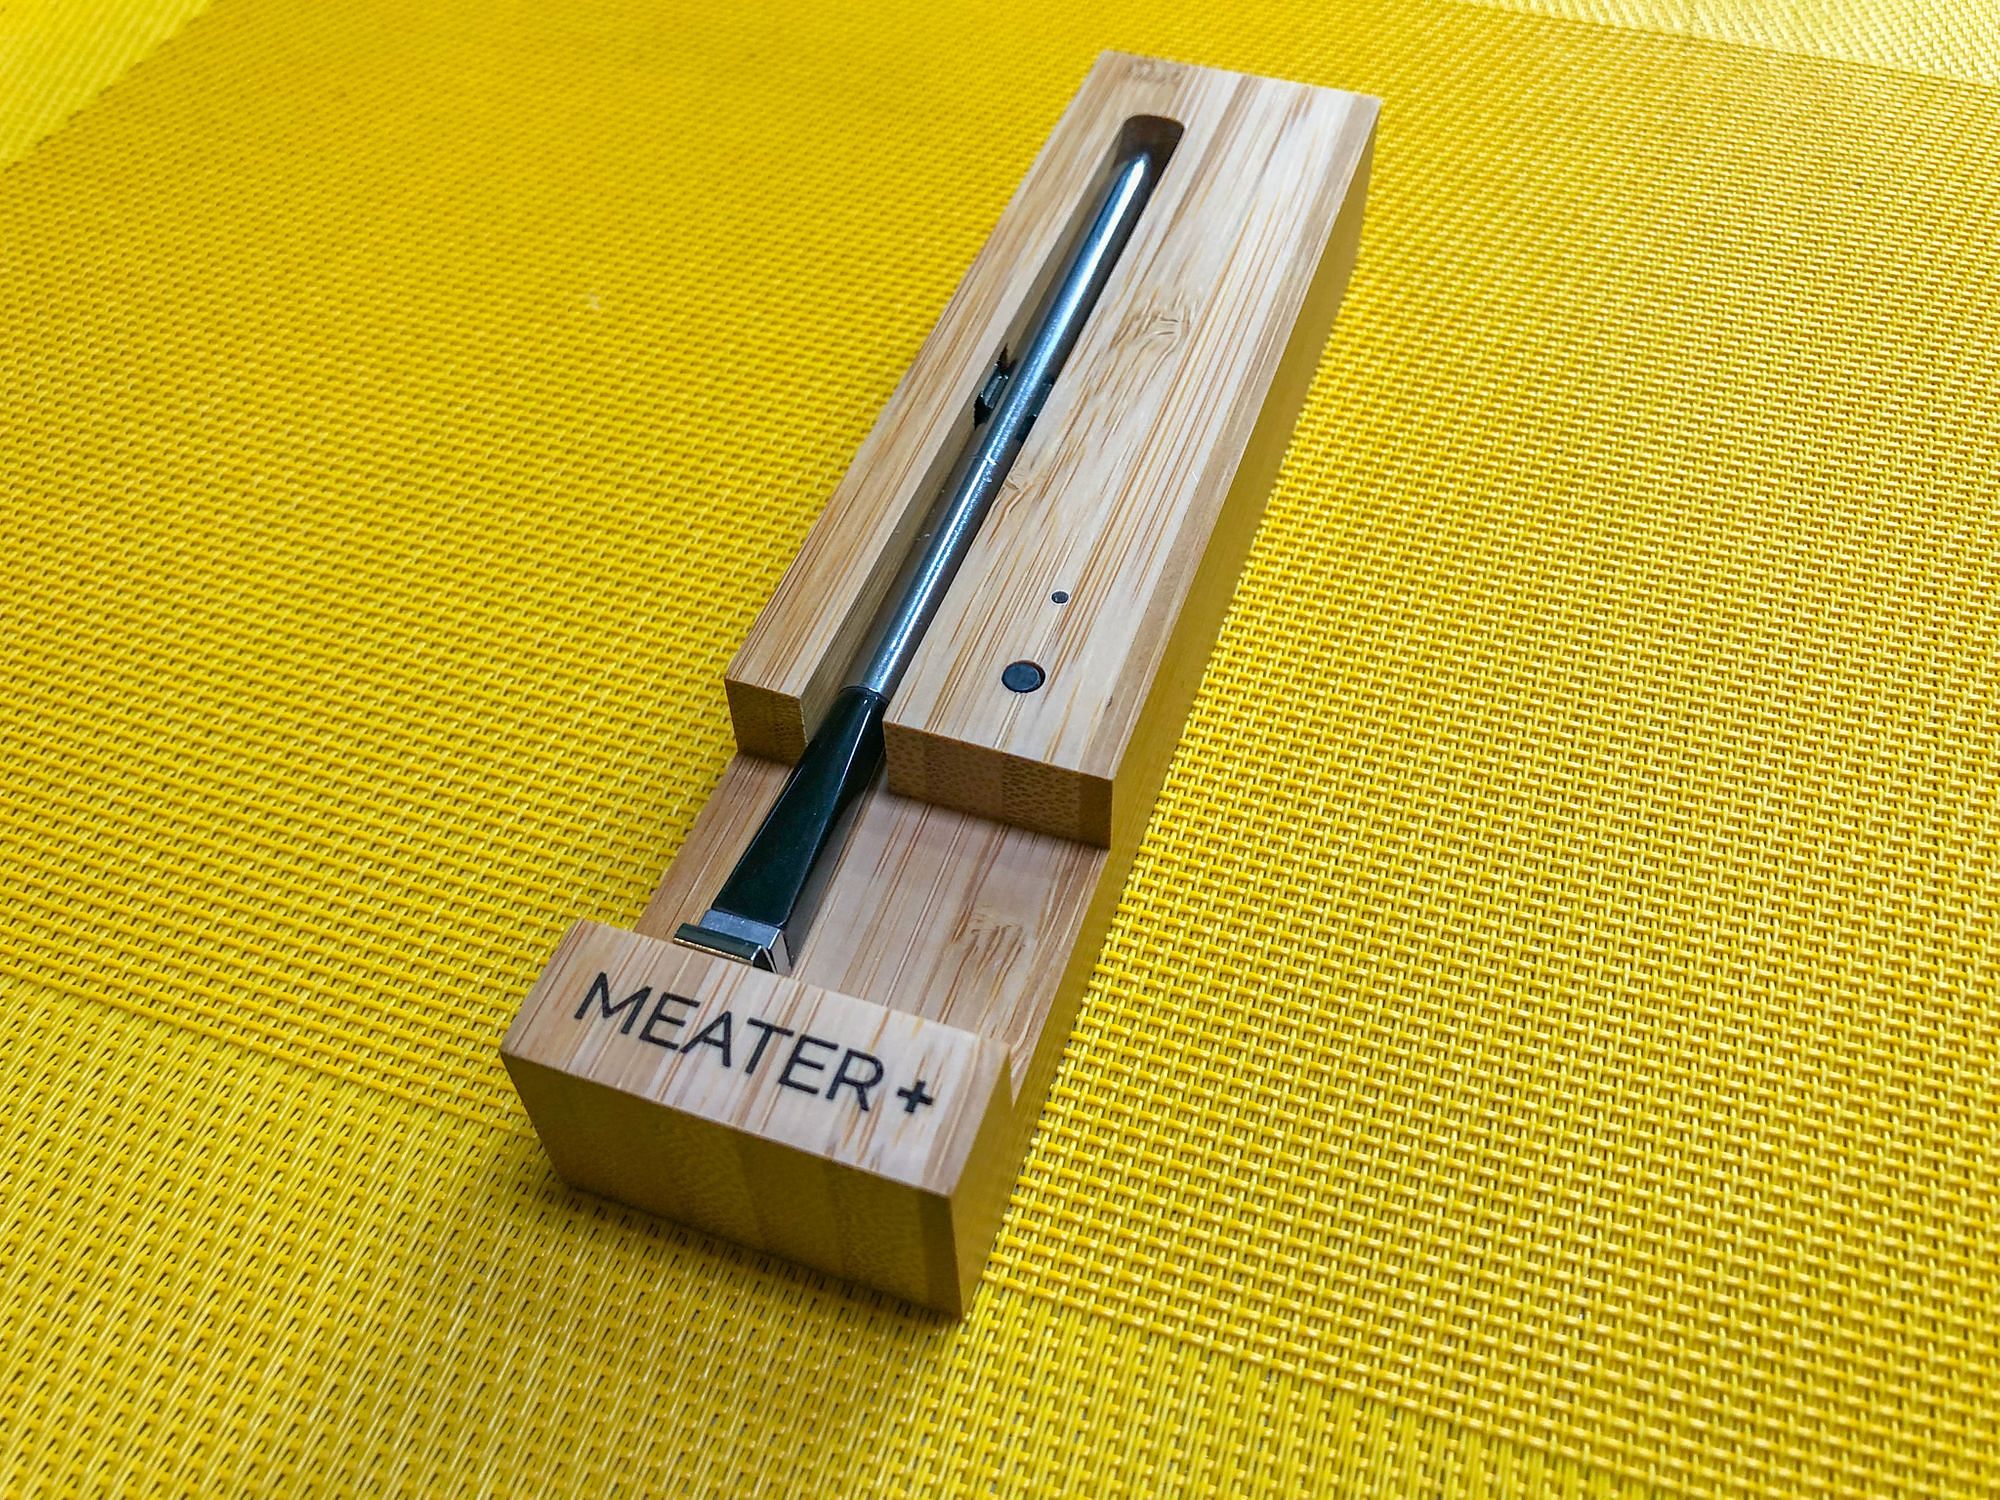 MEATER+ Charging Cradle